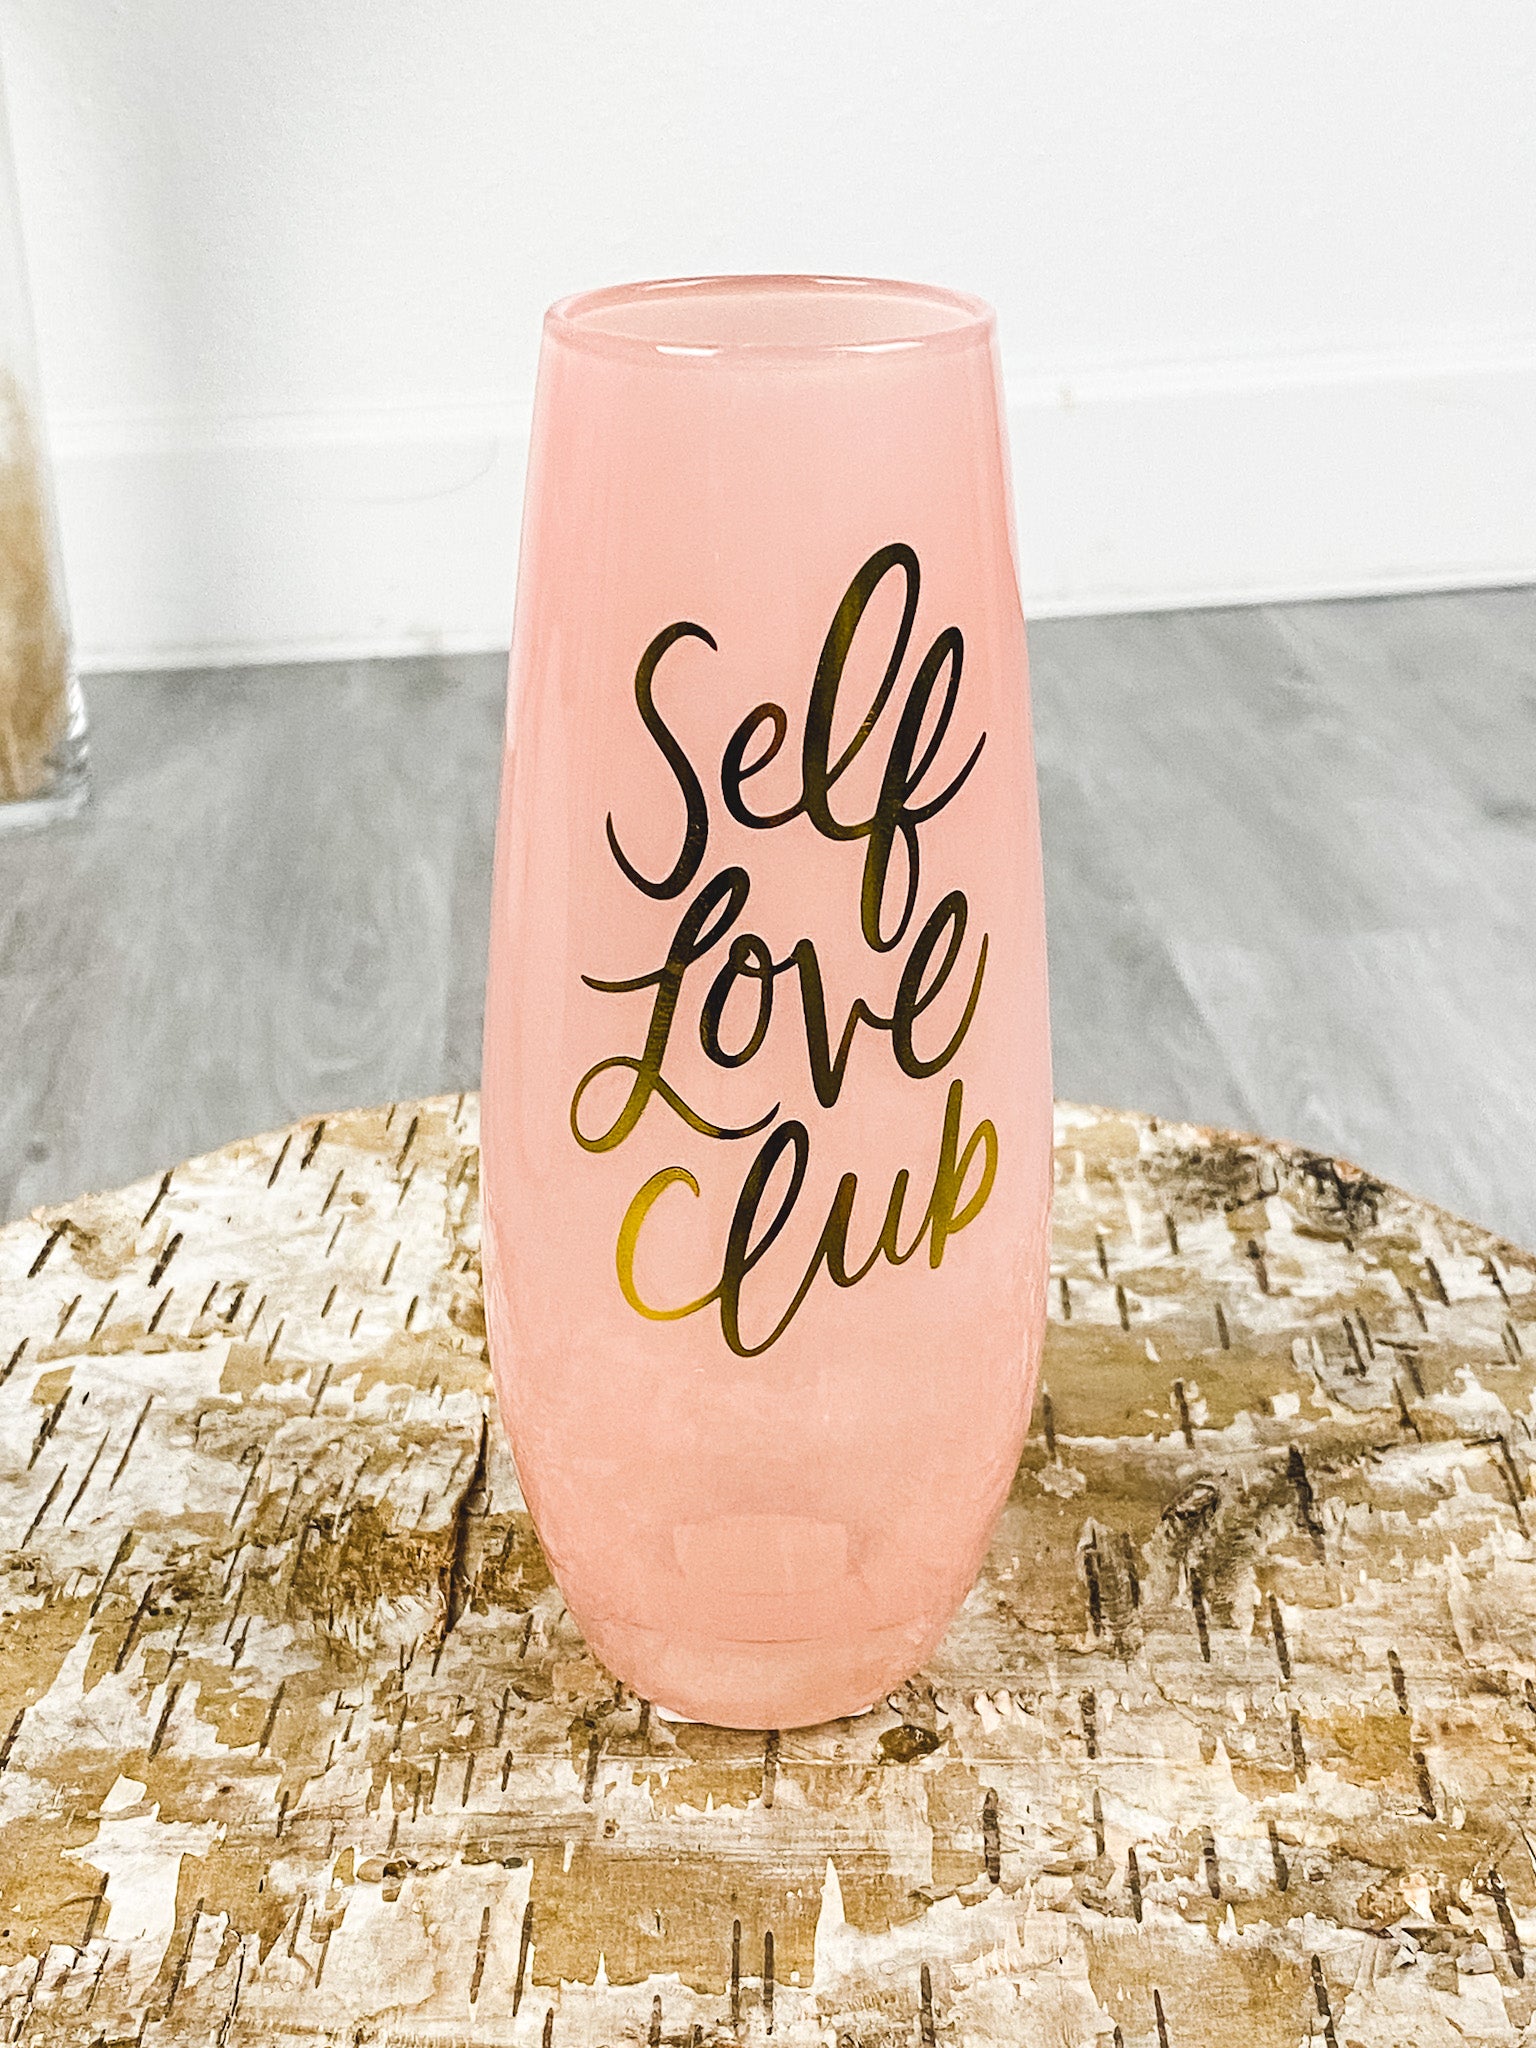 Self love club champagne flute - Trendy Tumblers, Mugs and Cups at Lush Fashion Lounge Boutique in Oklahoma City